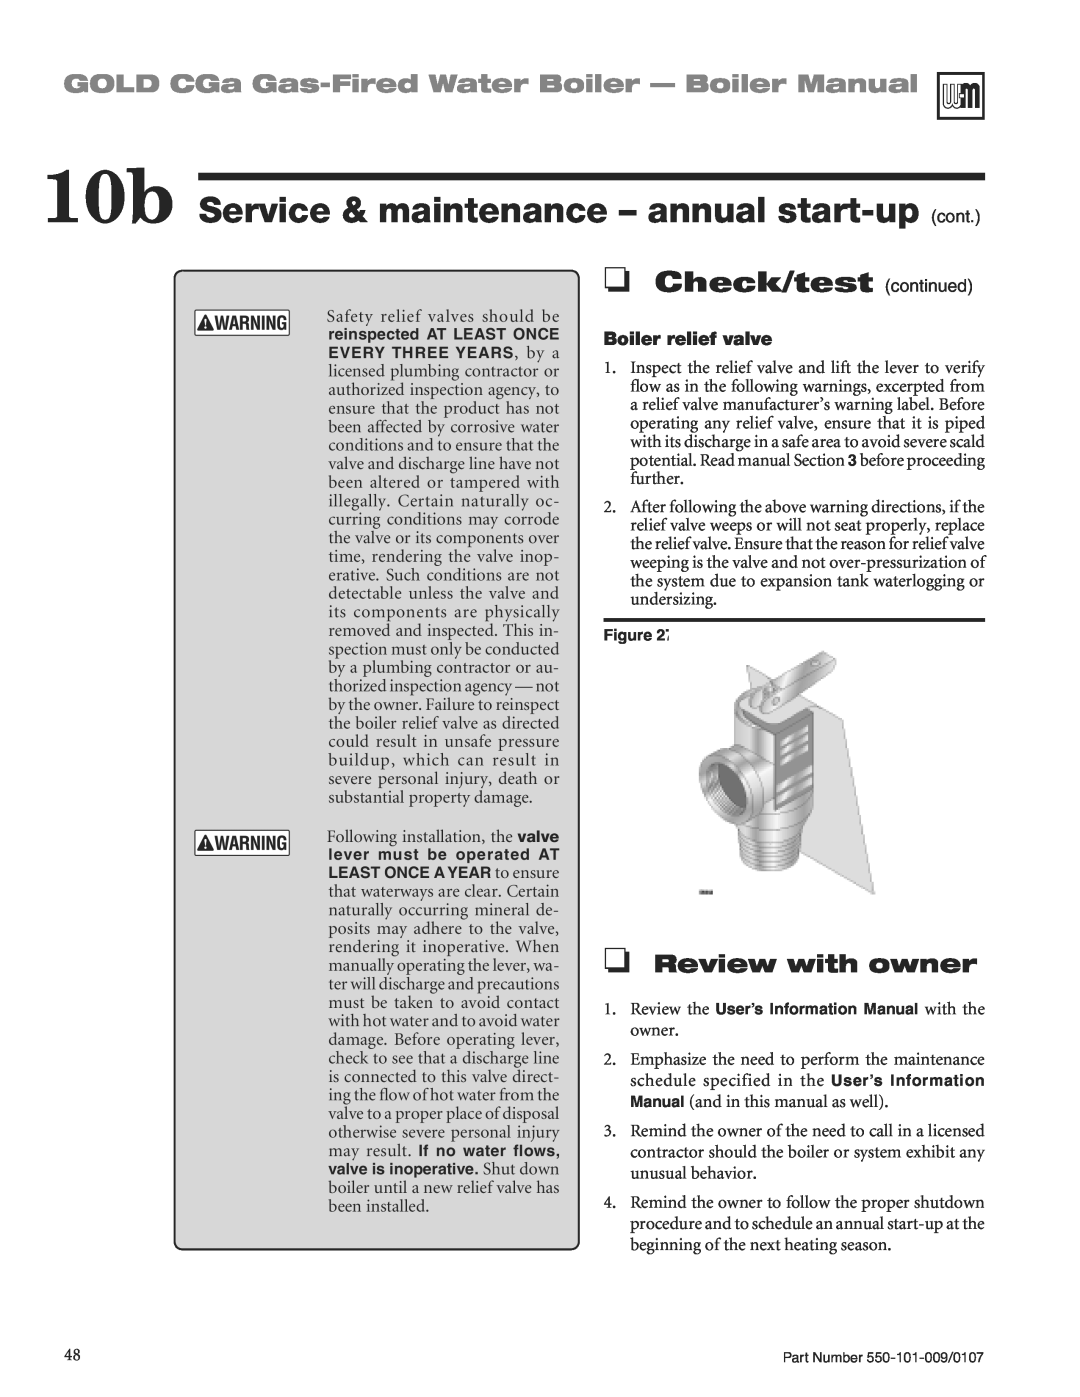 Weil-McLain CGA25SPDN manual OCheck/test continued, 10b Service & maintenance - annual start-up cont, OReview with owner 